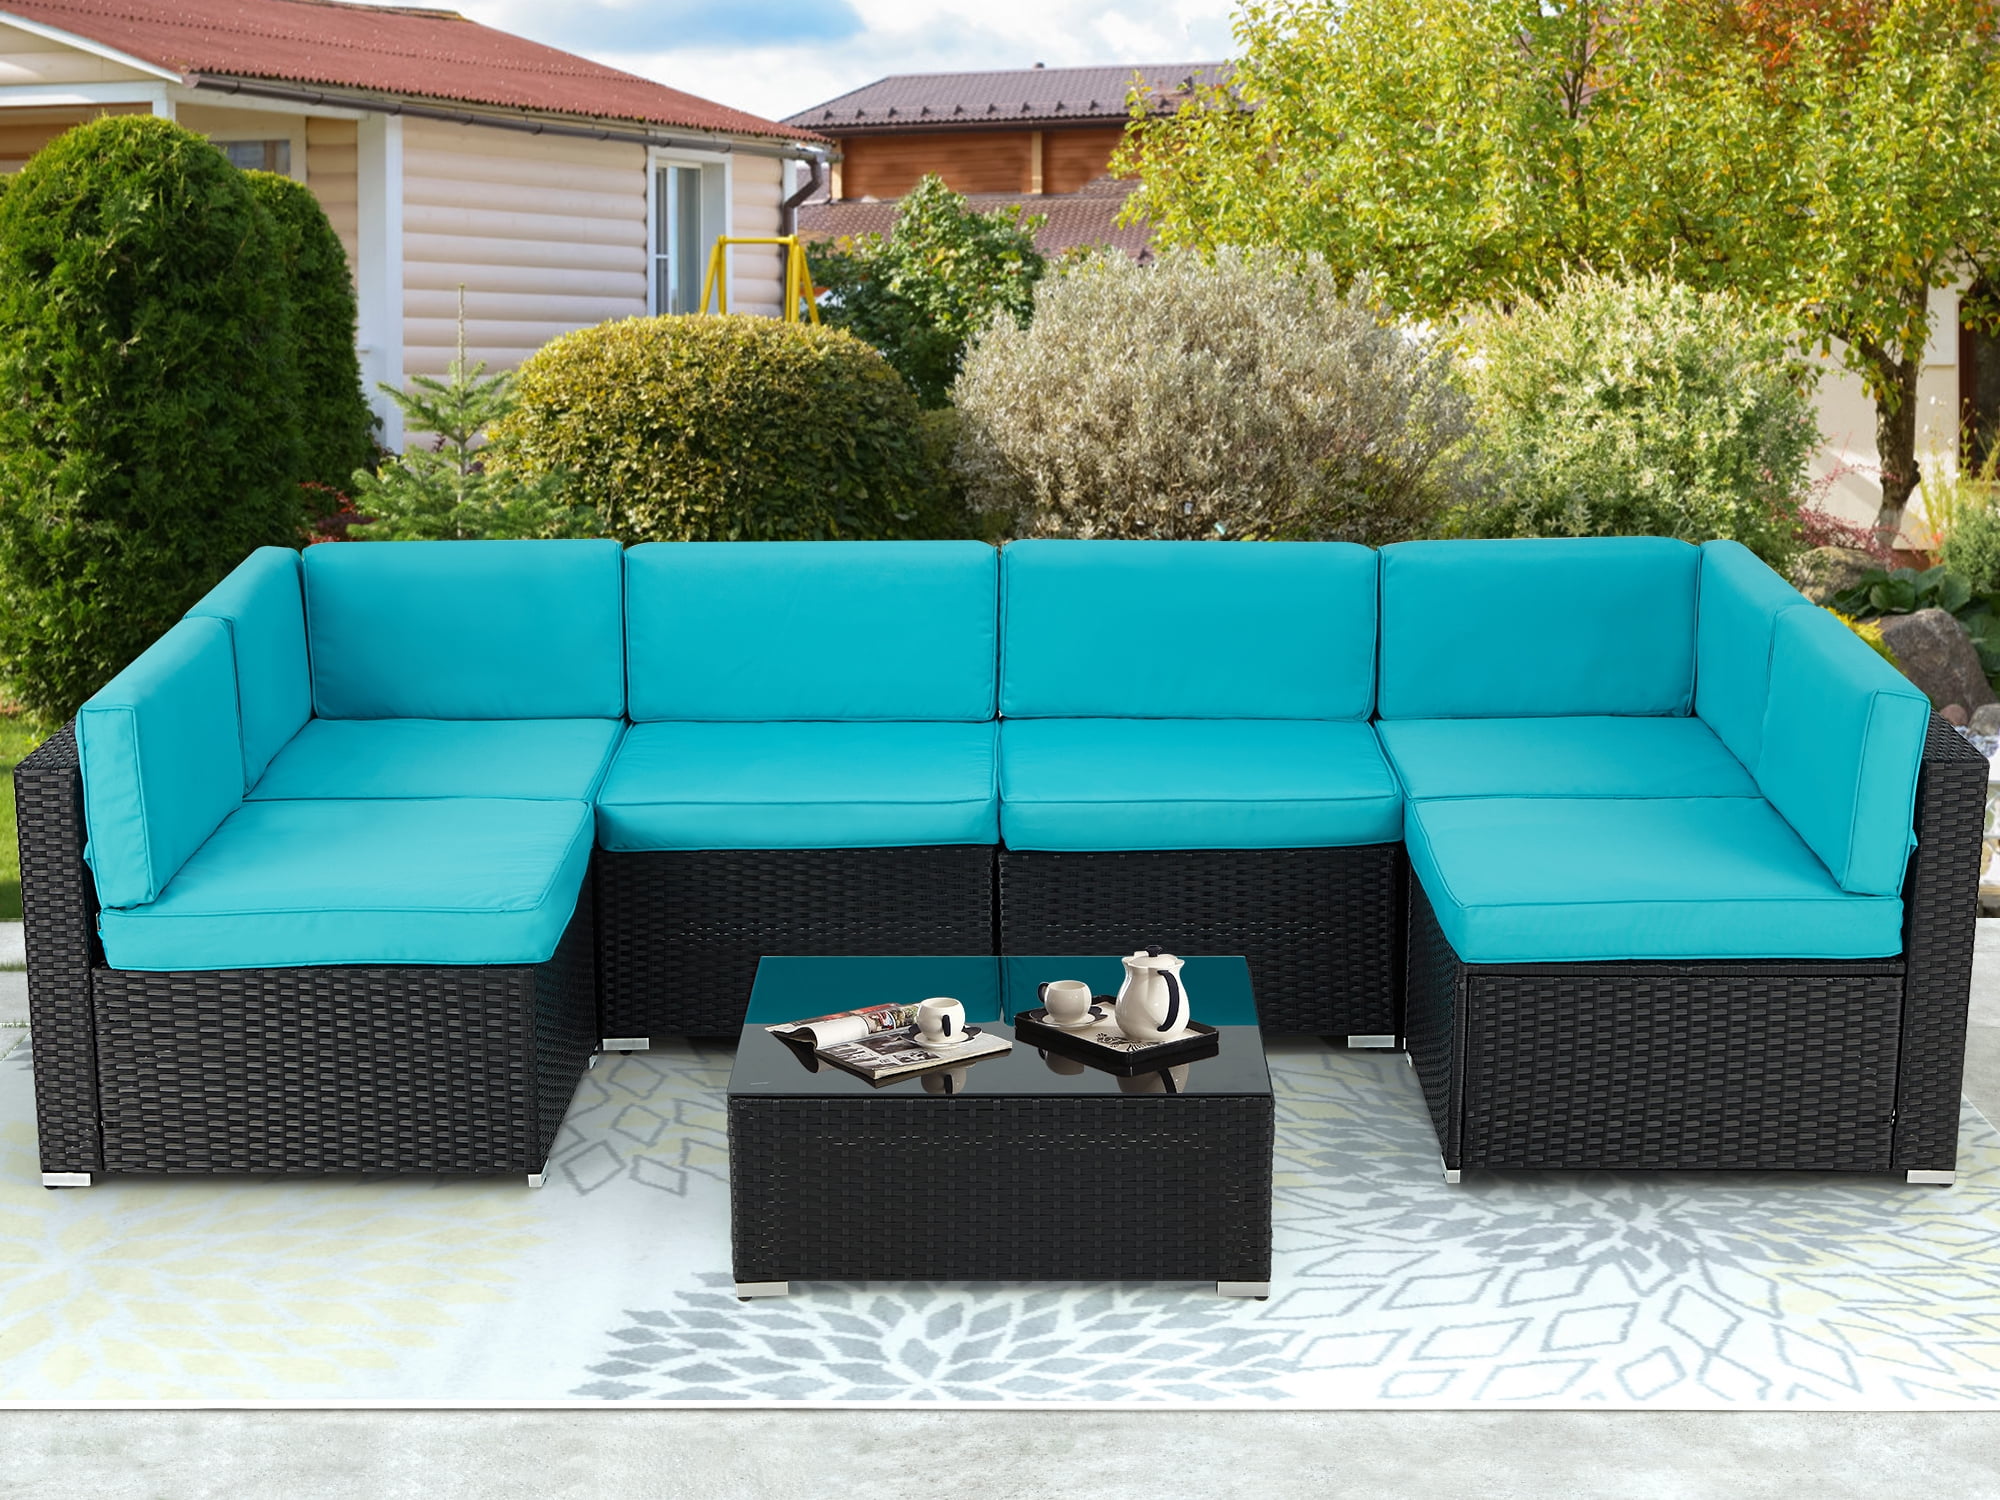 Danrelax 7 Pc Outdoor Patio Sectional Set, Blue and Black Steel with Cushions